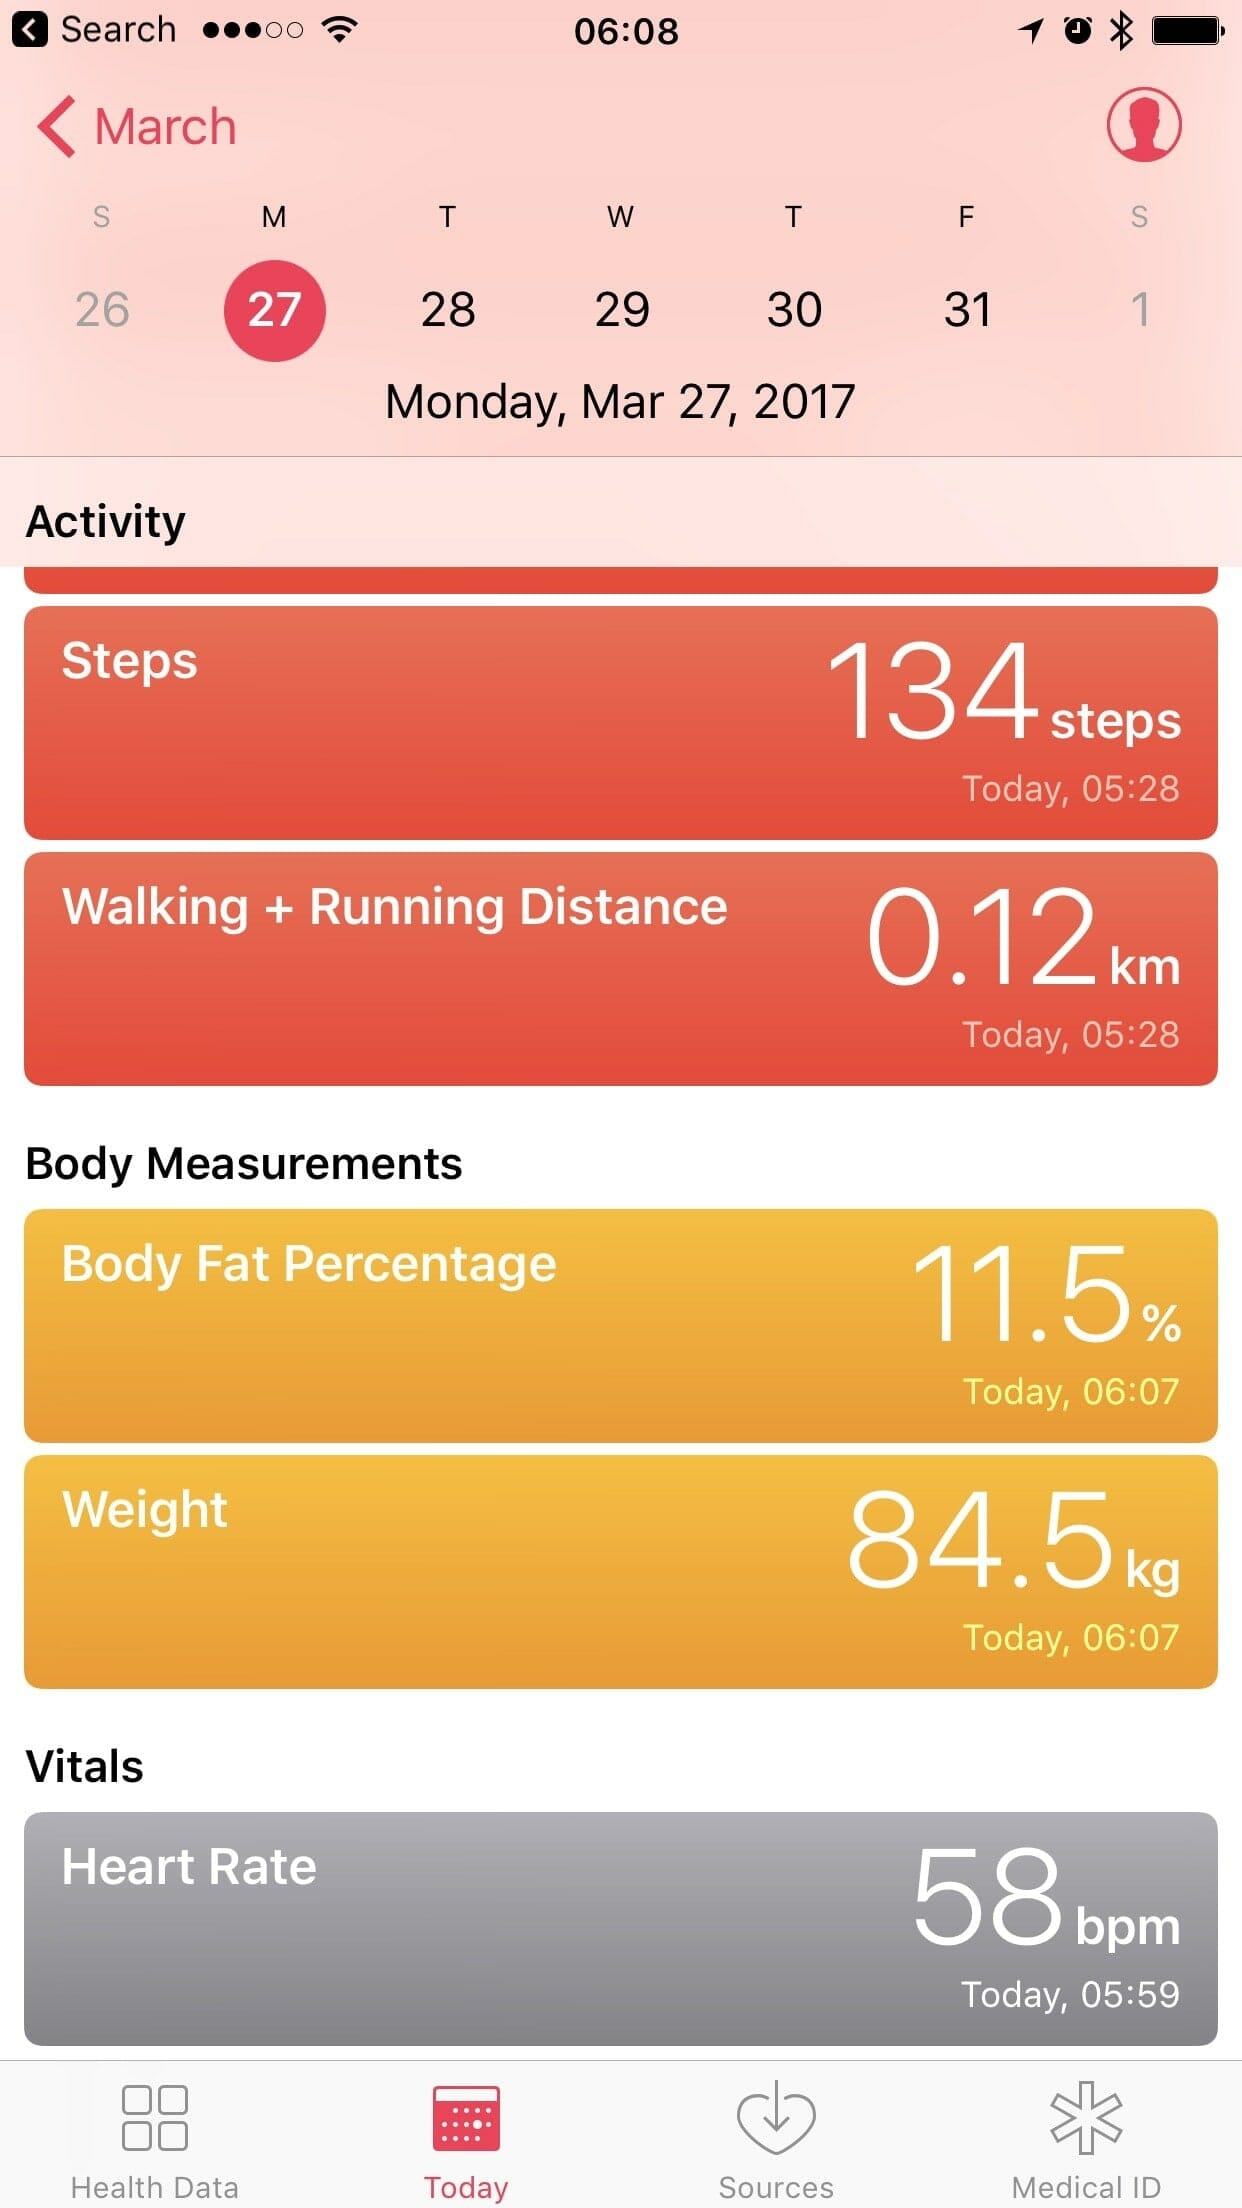 sync fitbit aria to apple health